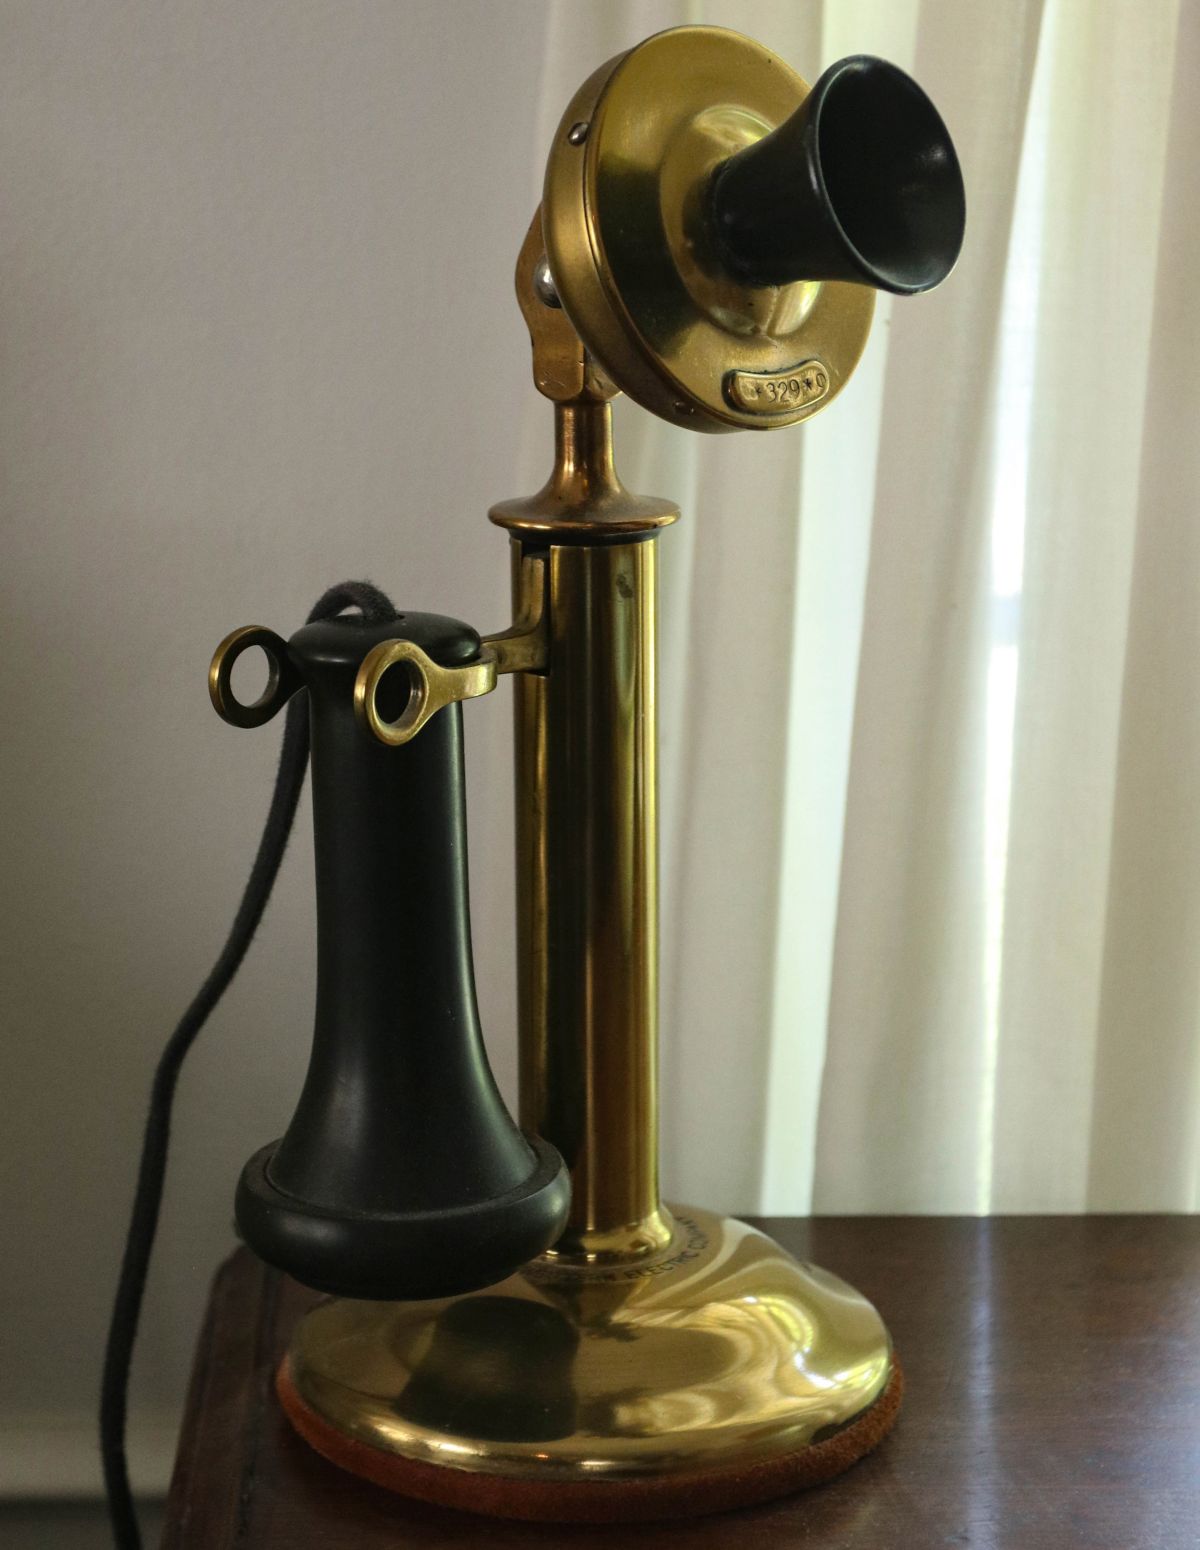 A NICE BRASS CANDLESTICK TELEPHONE PATENTED 1904